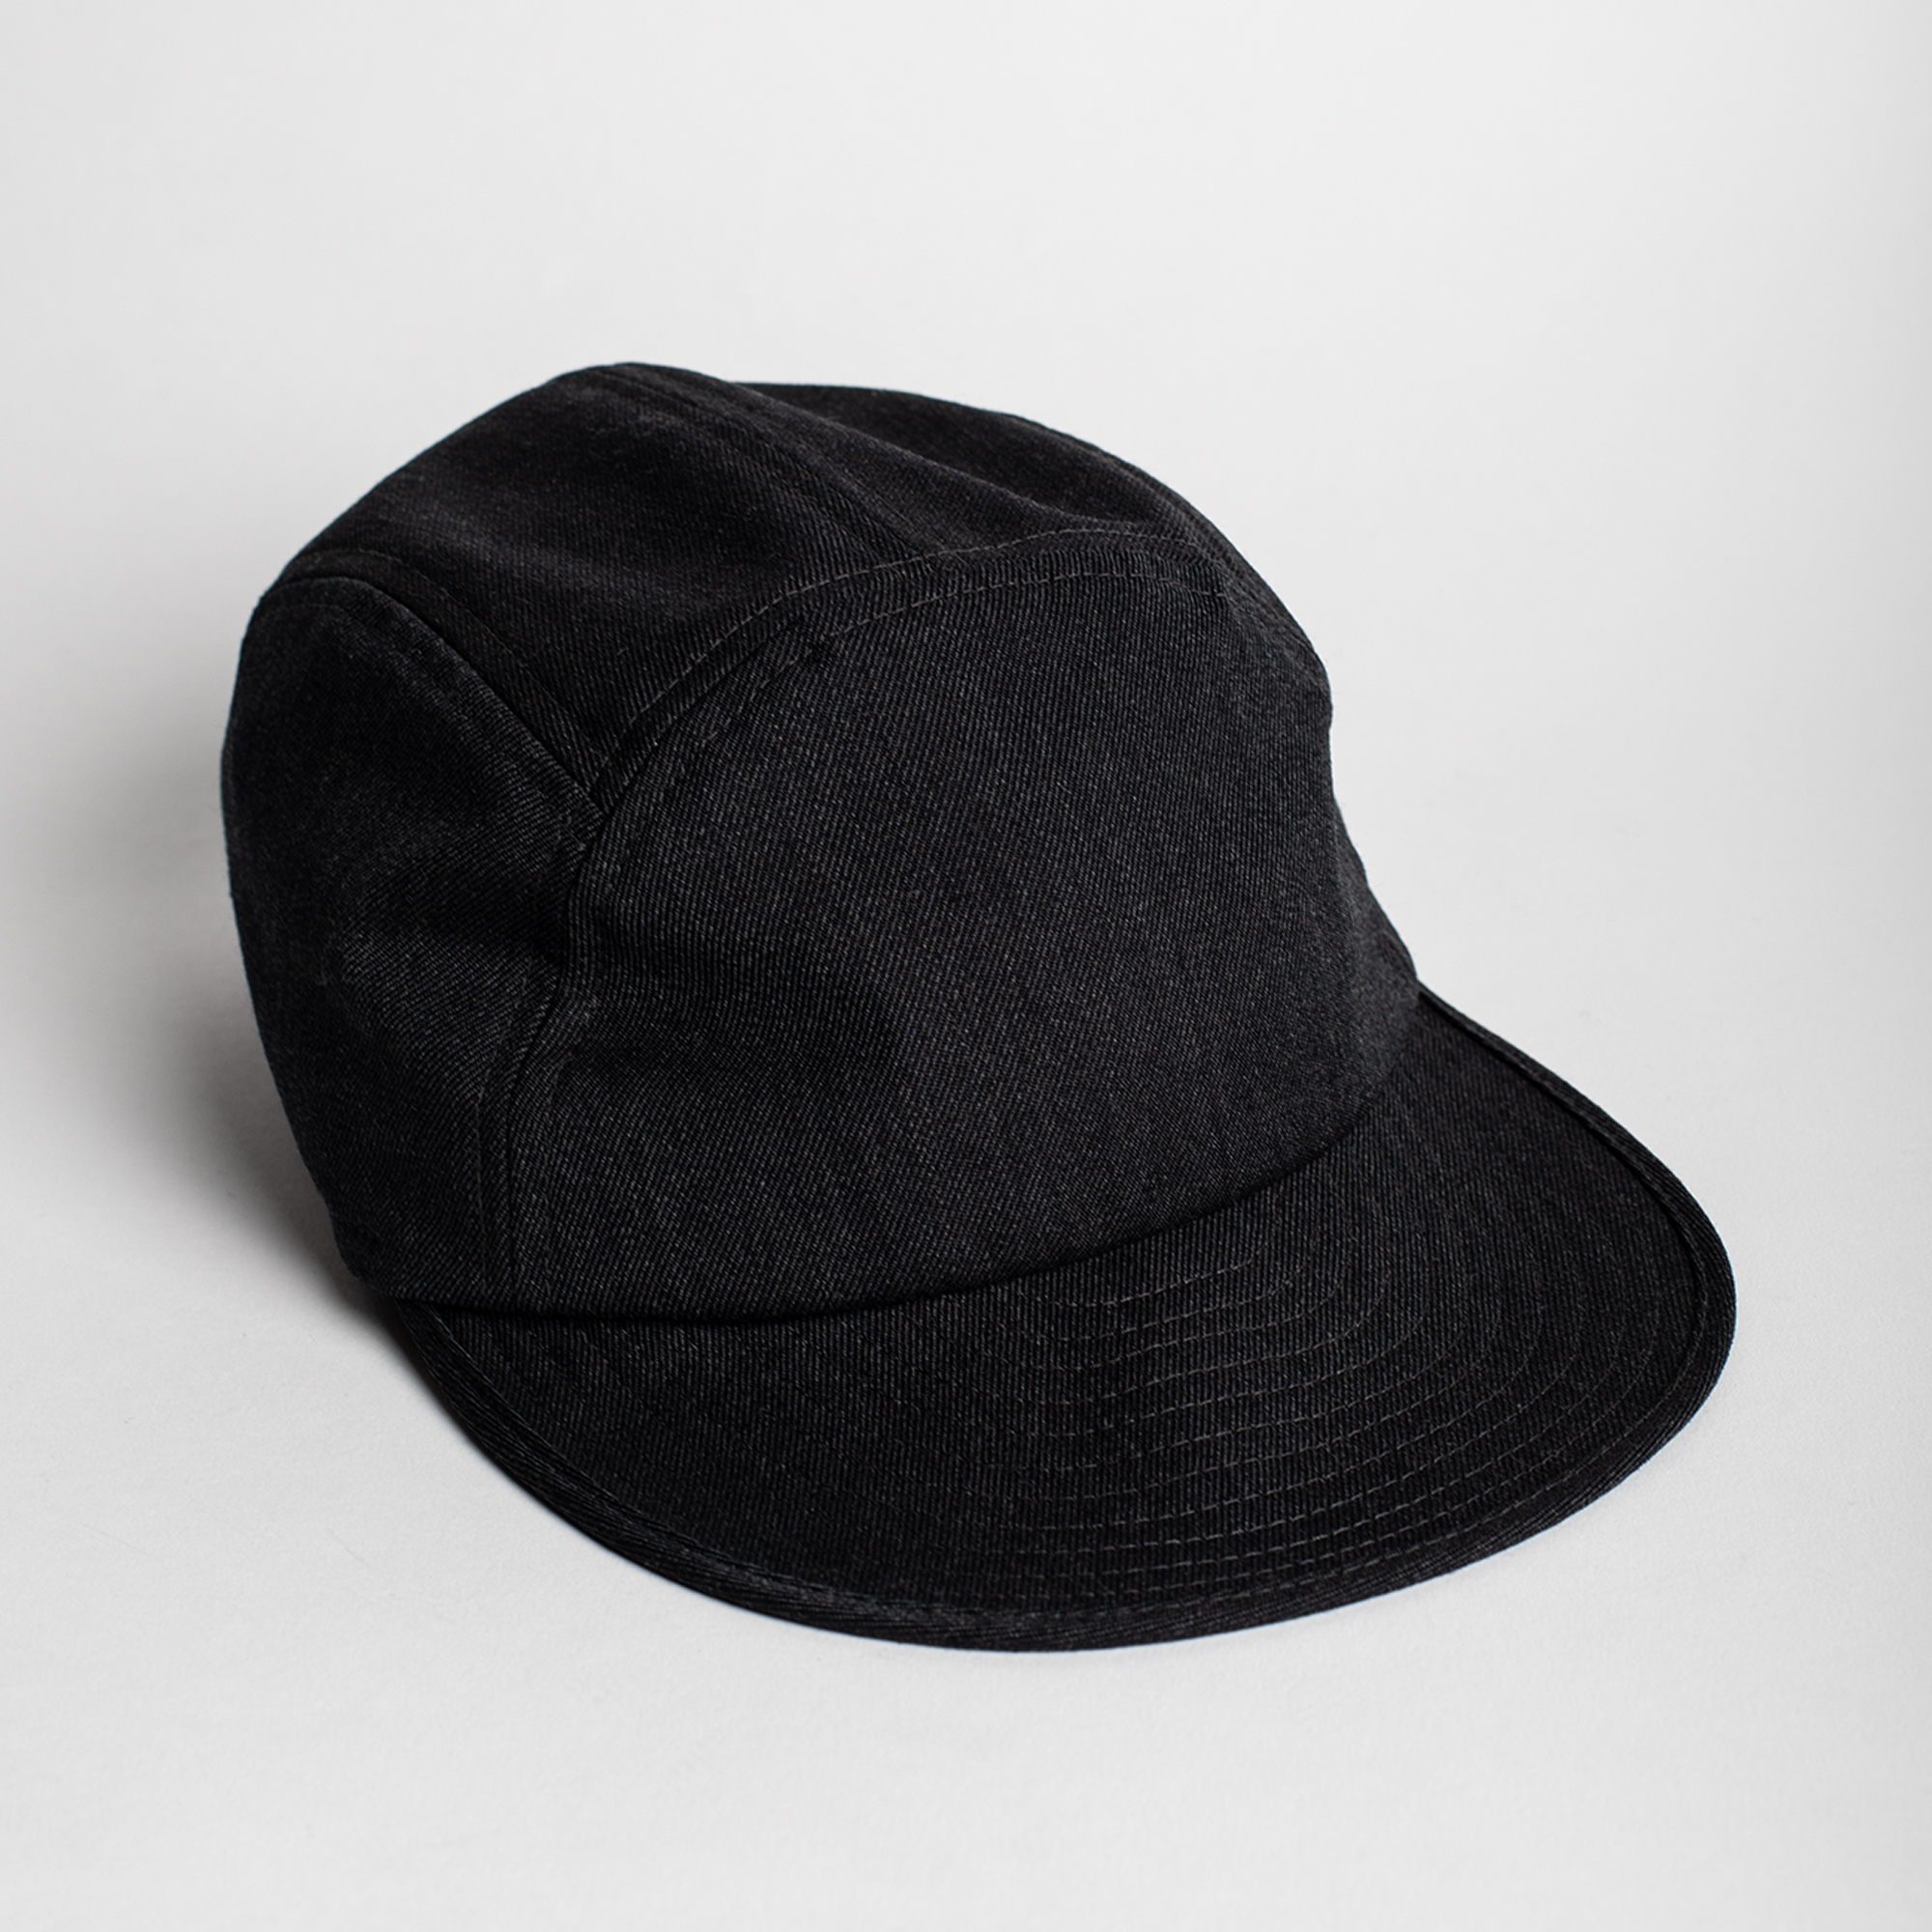 MARINA CAP in Charcoal wool by Arpenteur